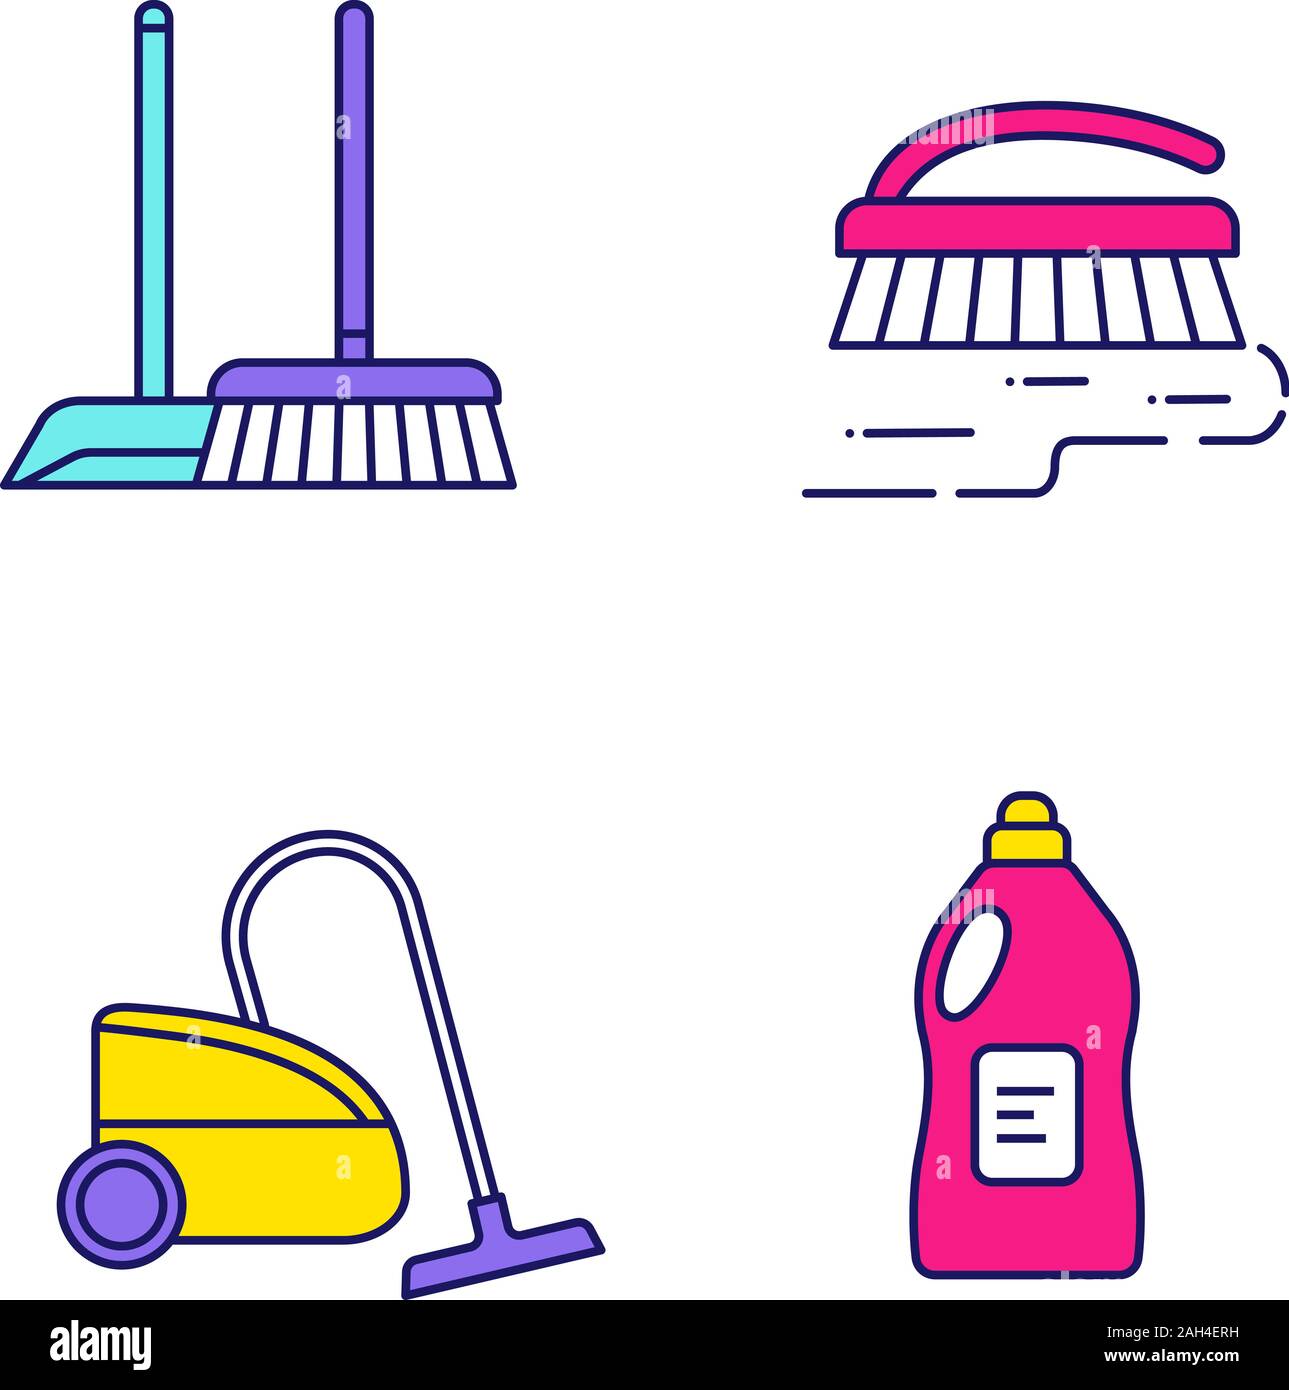 https://c8.alamy.com/comp/2AH4ERH/cleaning-service-color-icons-set-scoop-and-sweeping-brush-vacuum-cleaner-scrub-brush-cleaning-product-isolated-vector-illustrations-2AH4ERH.jpg